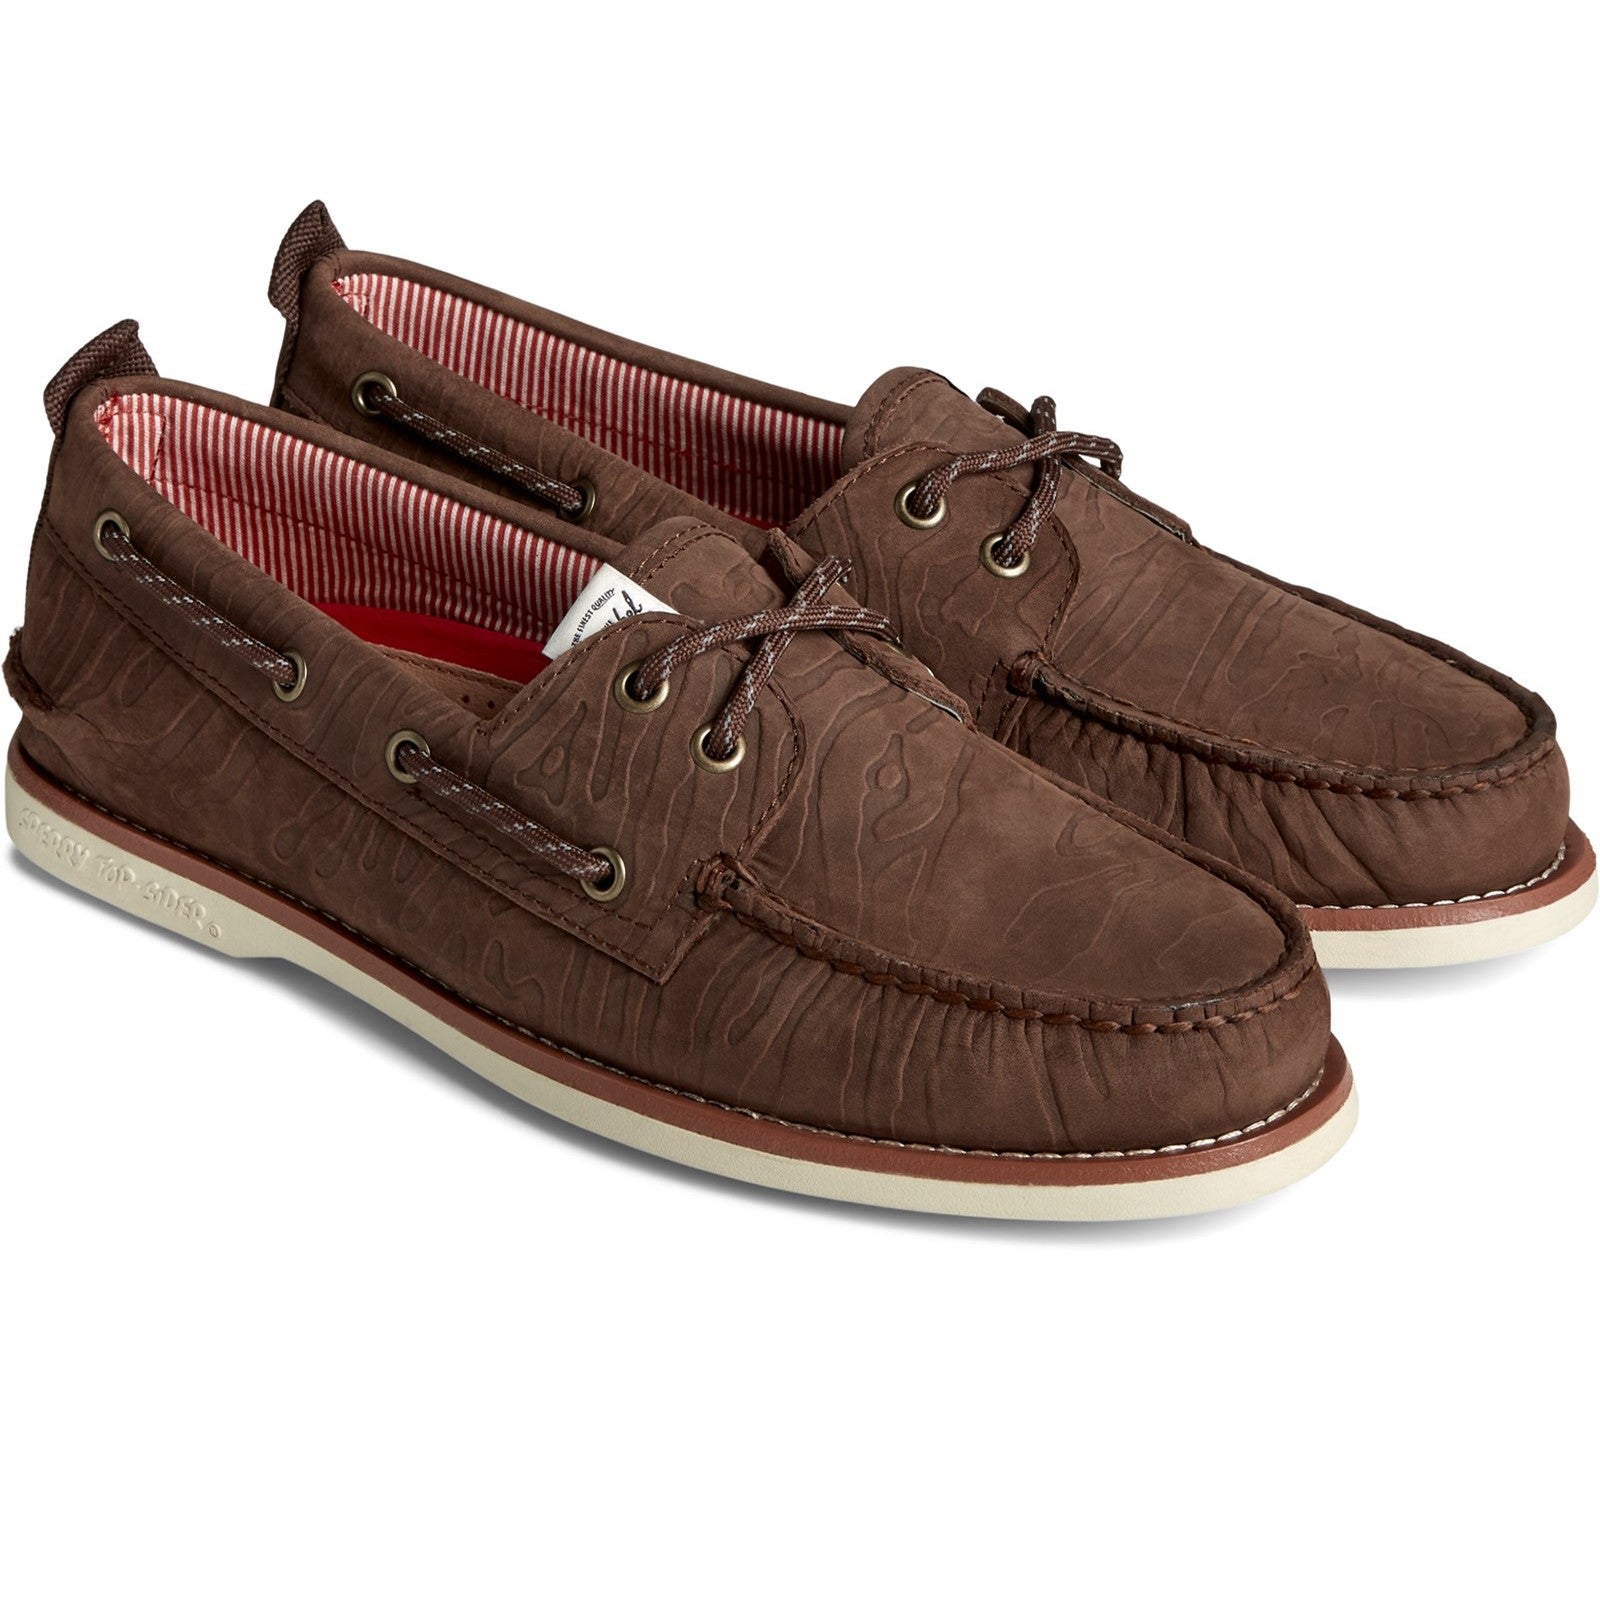 Sperry Mens Authentic Original 2-Eye Boat Shoes - Brown